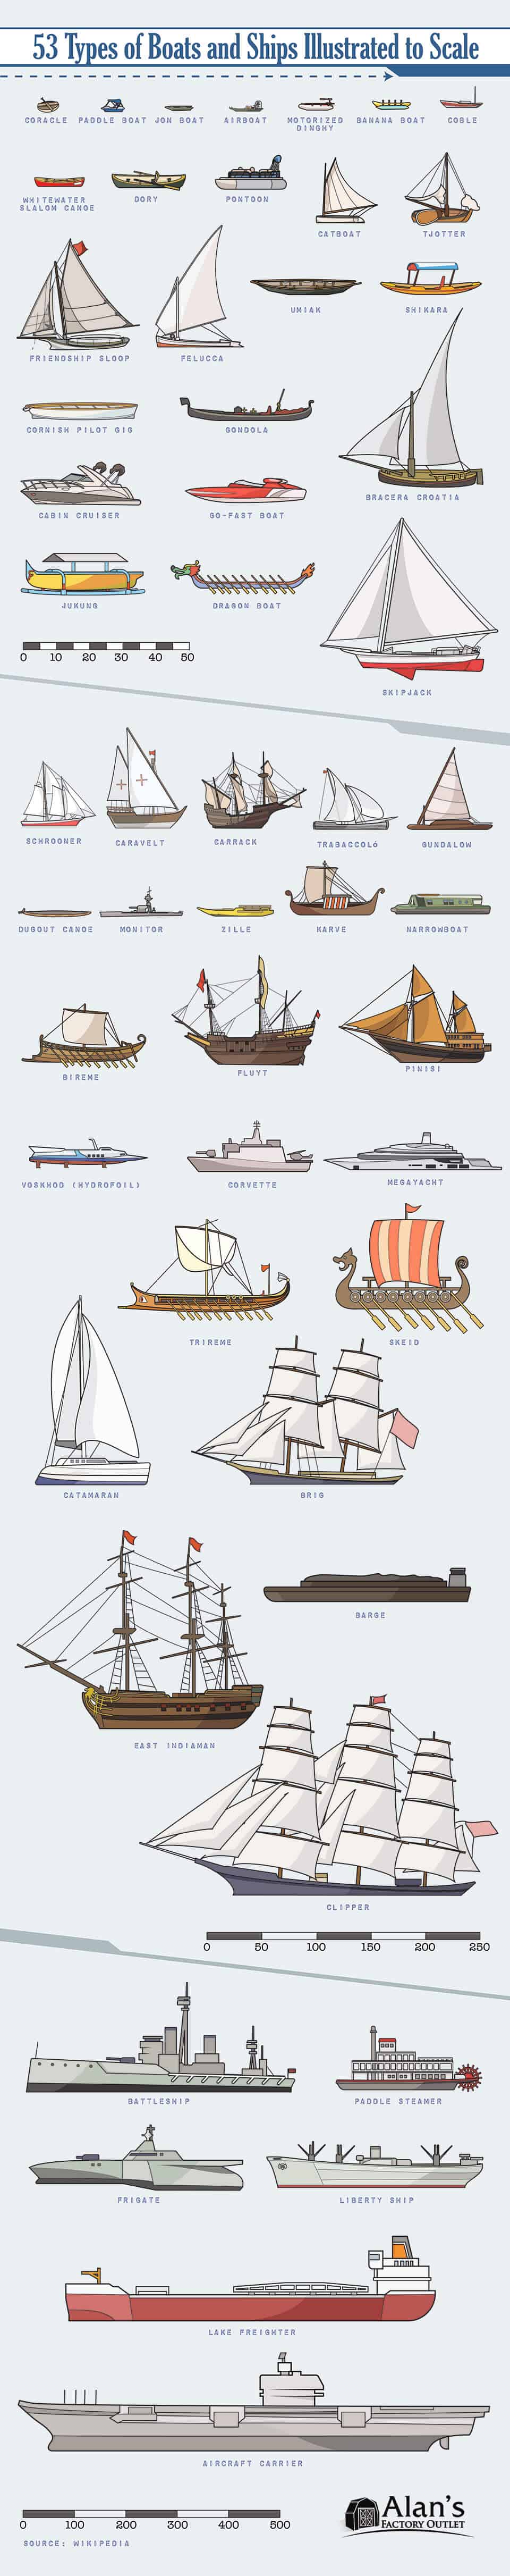 53 Types of Boats and Ships Illustrated to Scale - AlansFactoryOutlet.com - Infographic